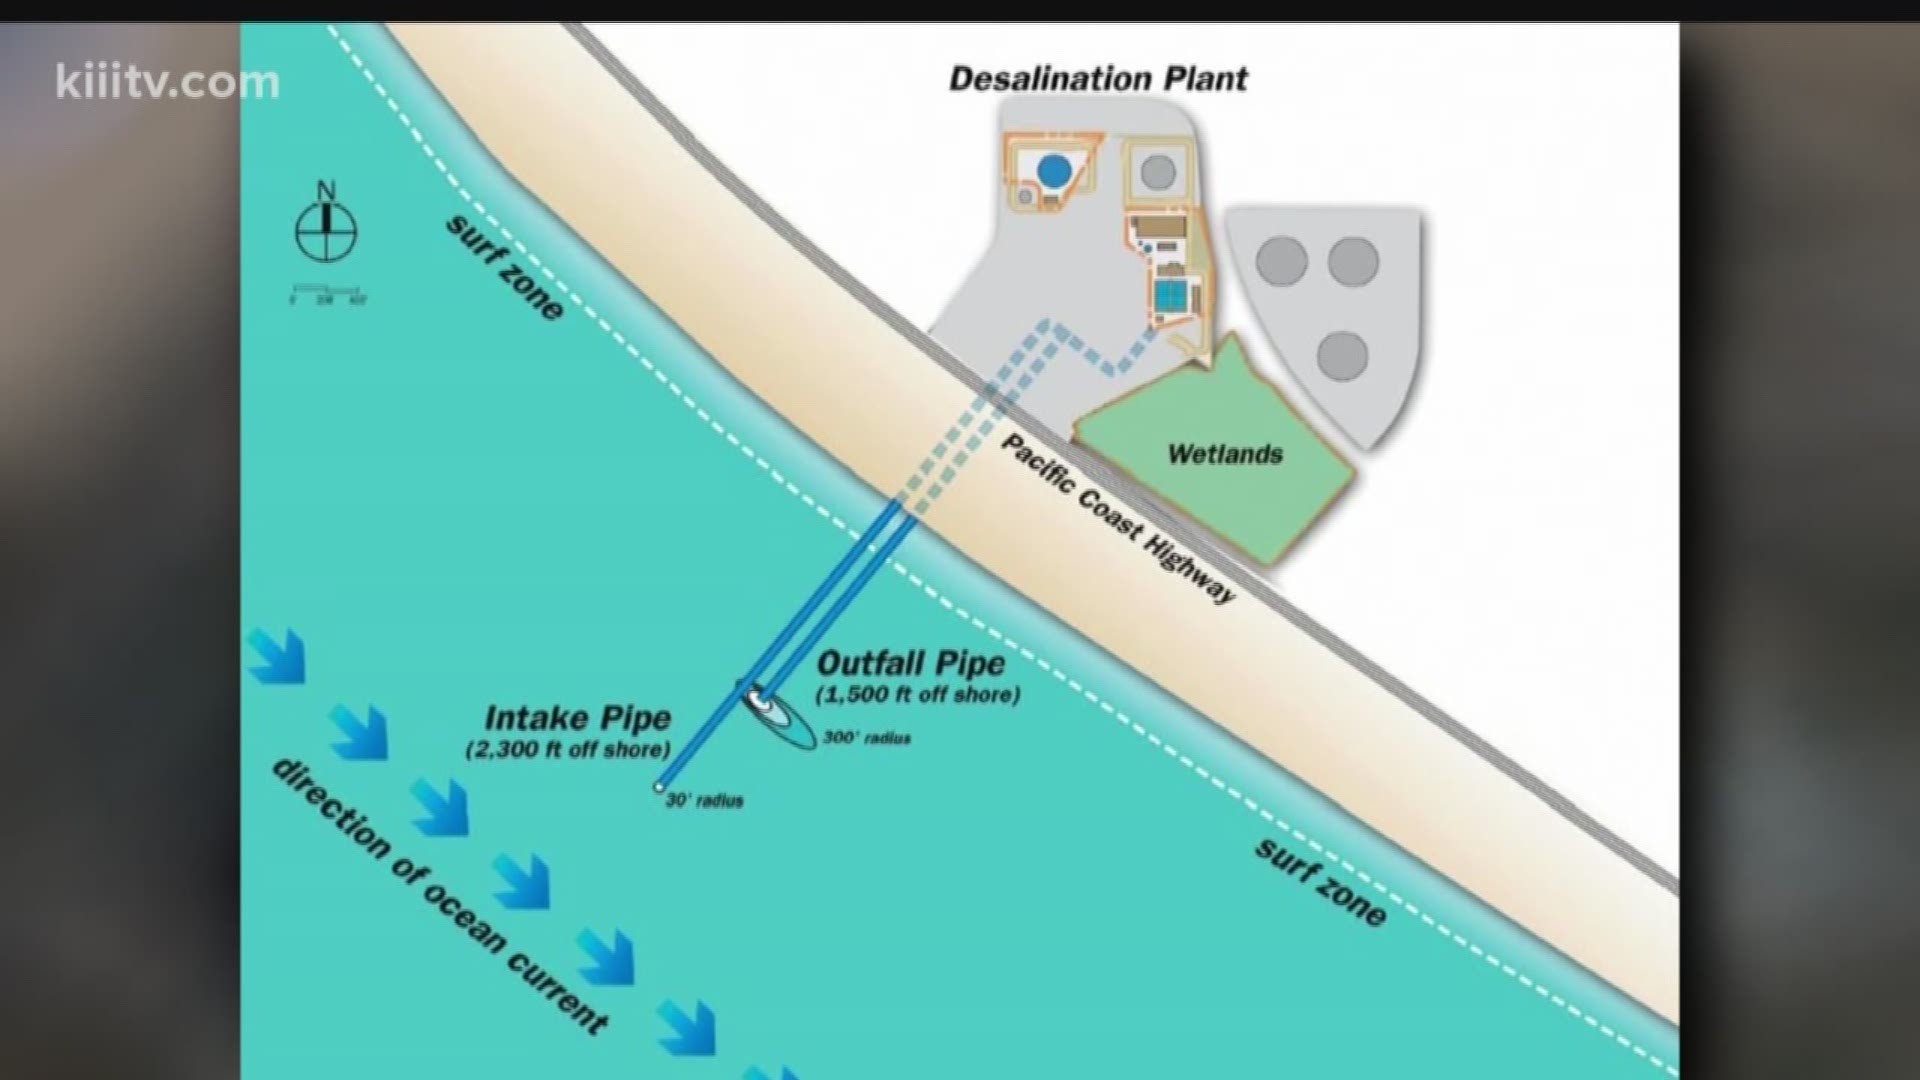 The City of Ingleside announced Wednesday they have an agreement with a company that wants to build a desalination plant on Corpus Christi Bay.